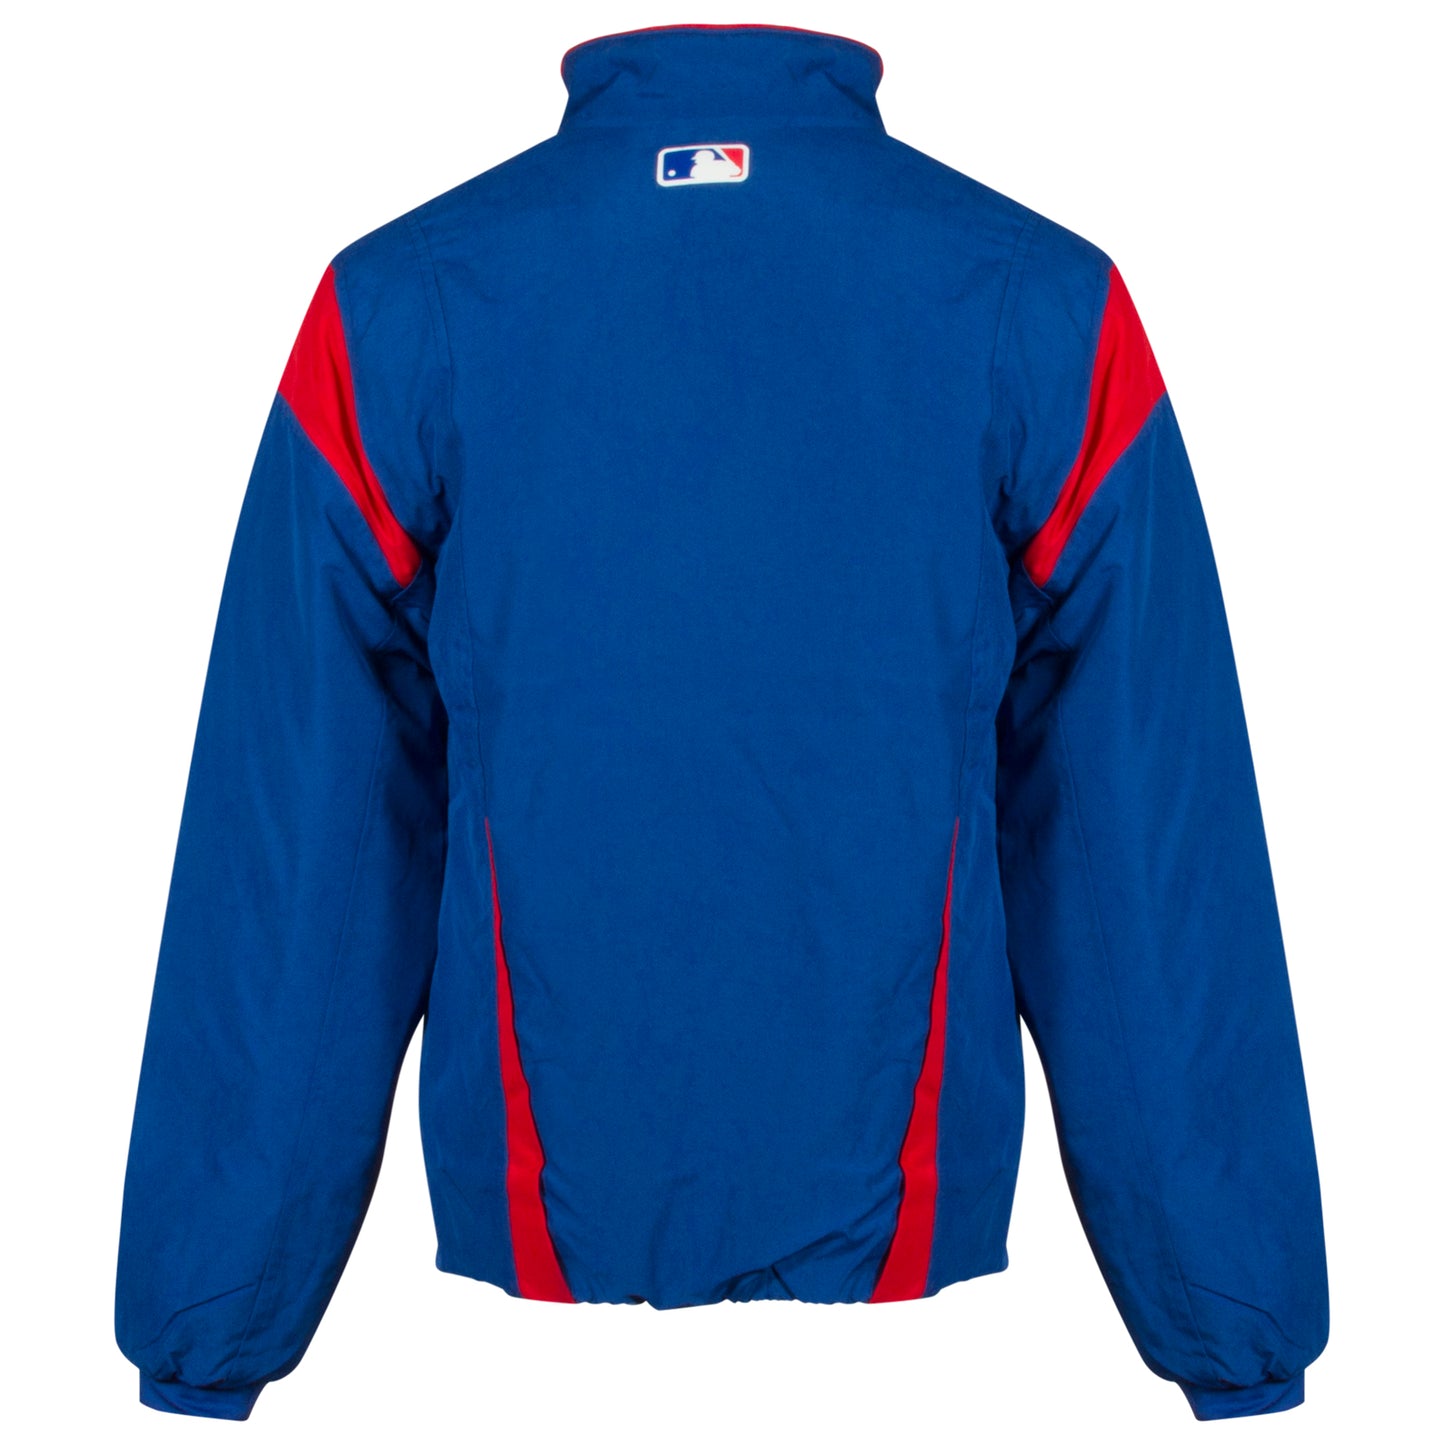 Chicago Cubs Men's Royal "Cubs" Logo 2016 On-Field Dugout Jacket